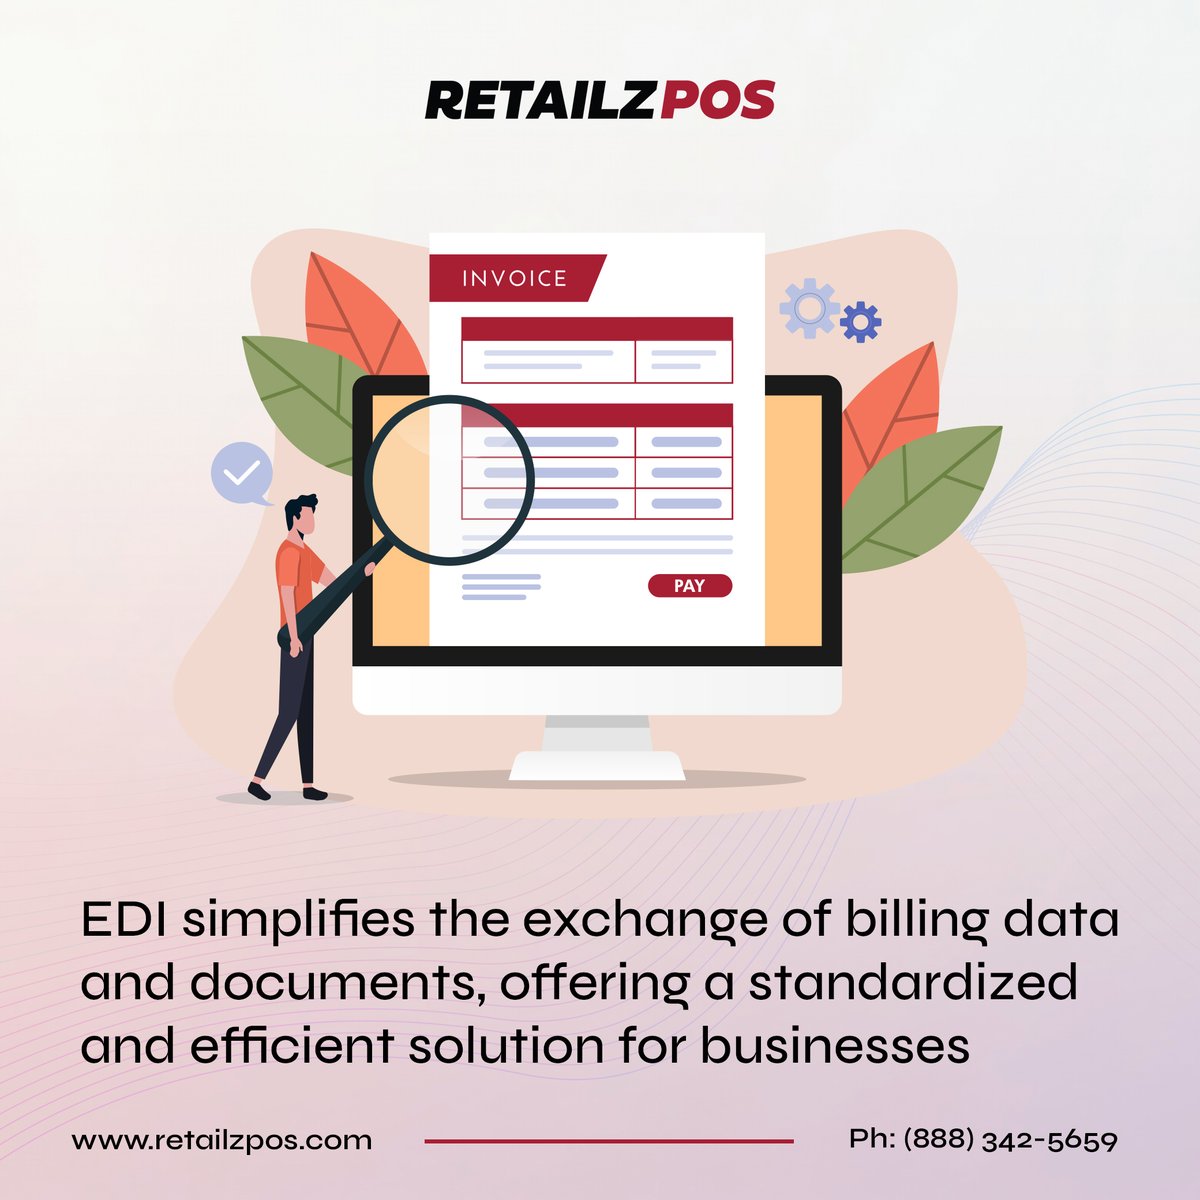 Implementing EDI for electronic billing brings several benefits. It reduces manual effort and eliminates the need for paper-based invoicing. This saves time and resources for businesses, leading to cost savings and increased productivity. #EDI #ElectronicBilling #DigitalInvoicing